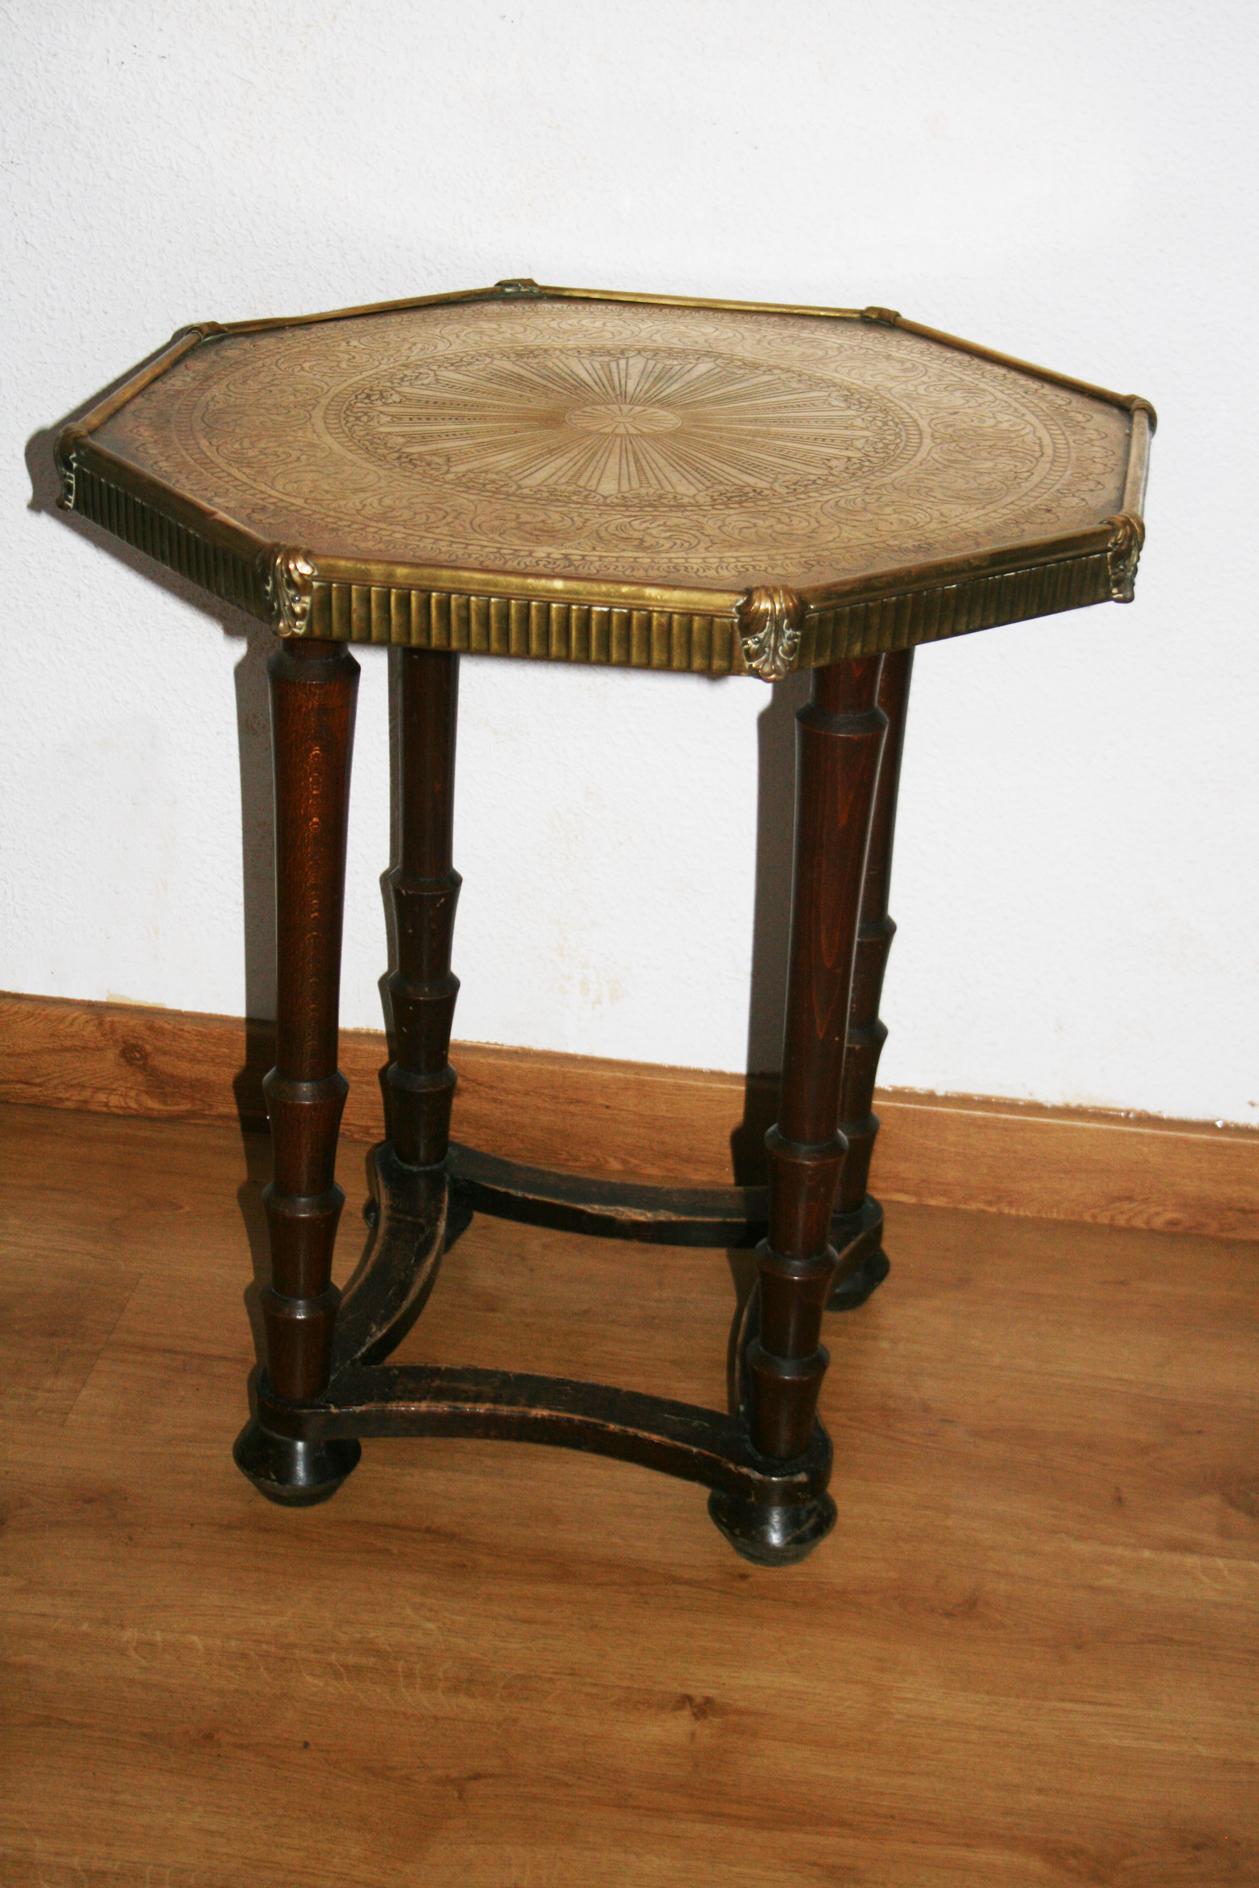 
*Covid-19 -I ship with international express.Insure sending regularly and safely US, UK and Europe .Other destinations consult

in carved brass and wood side table, from the late 19th or 
early 20th century 

Embossed brass top in the middle